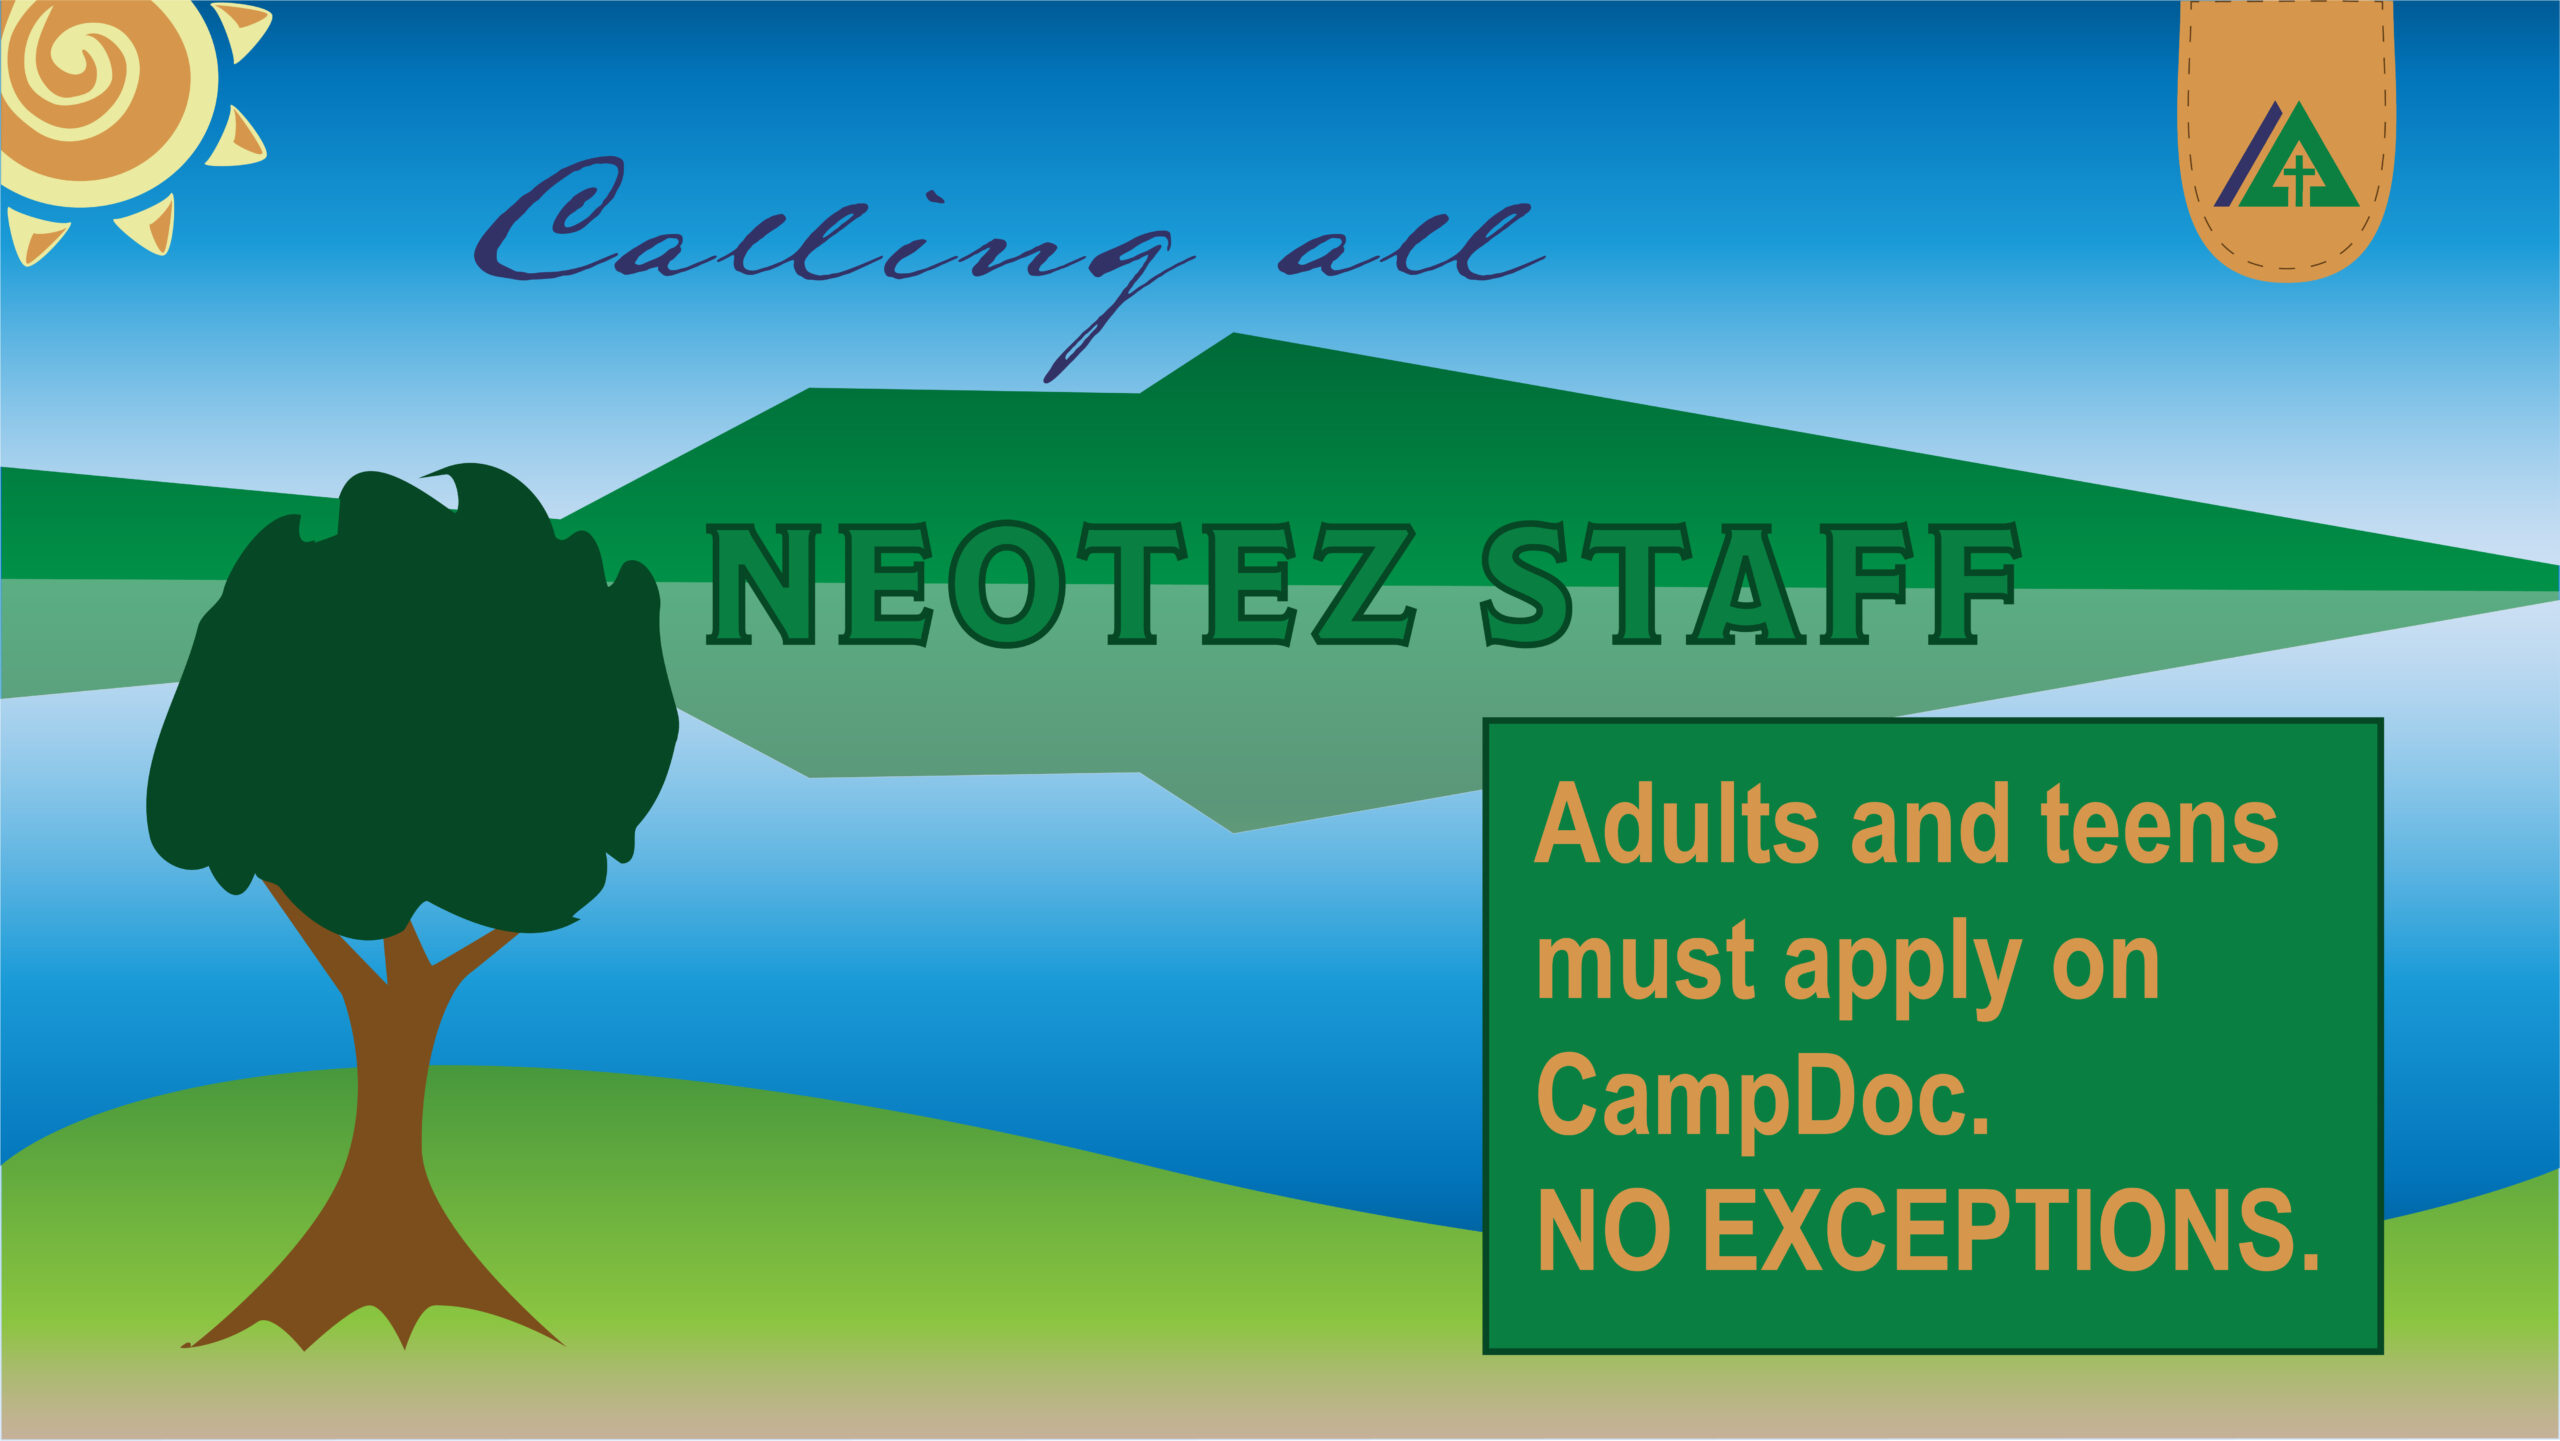 apps open for summer sessions link to app.campdoc.com/register/neotez green letters gray background